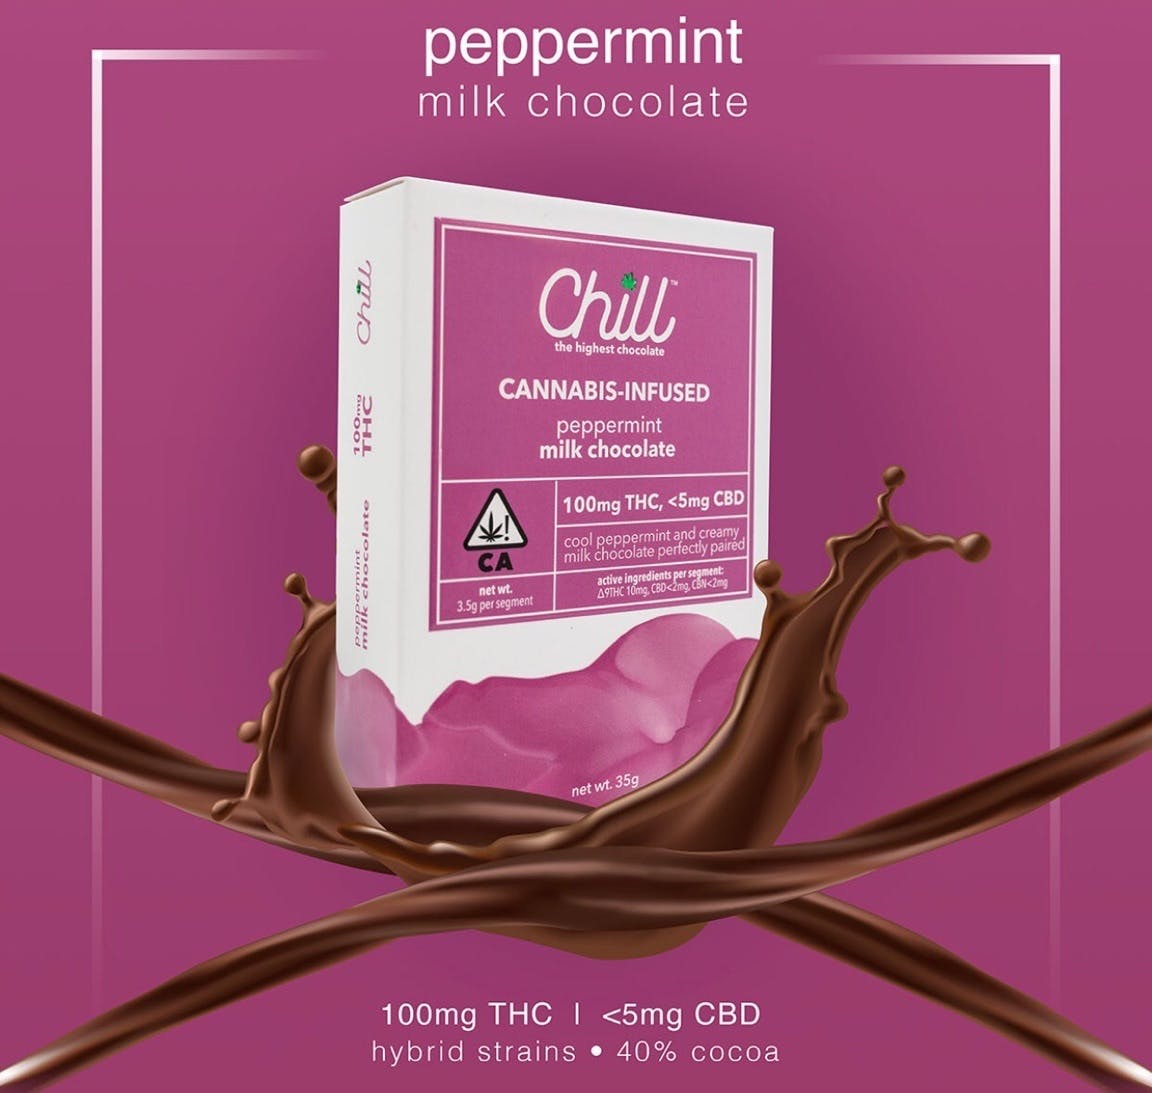 edible-chill-chocolate-chill-chocolate-peppermint-chocolate-bar-100mg